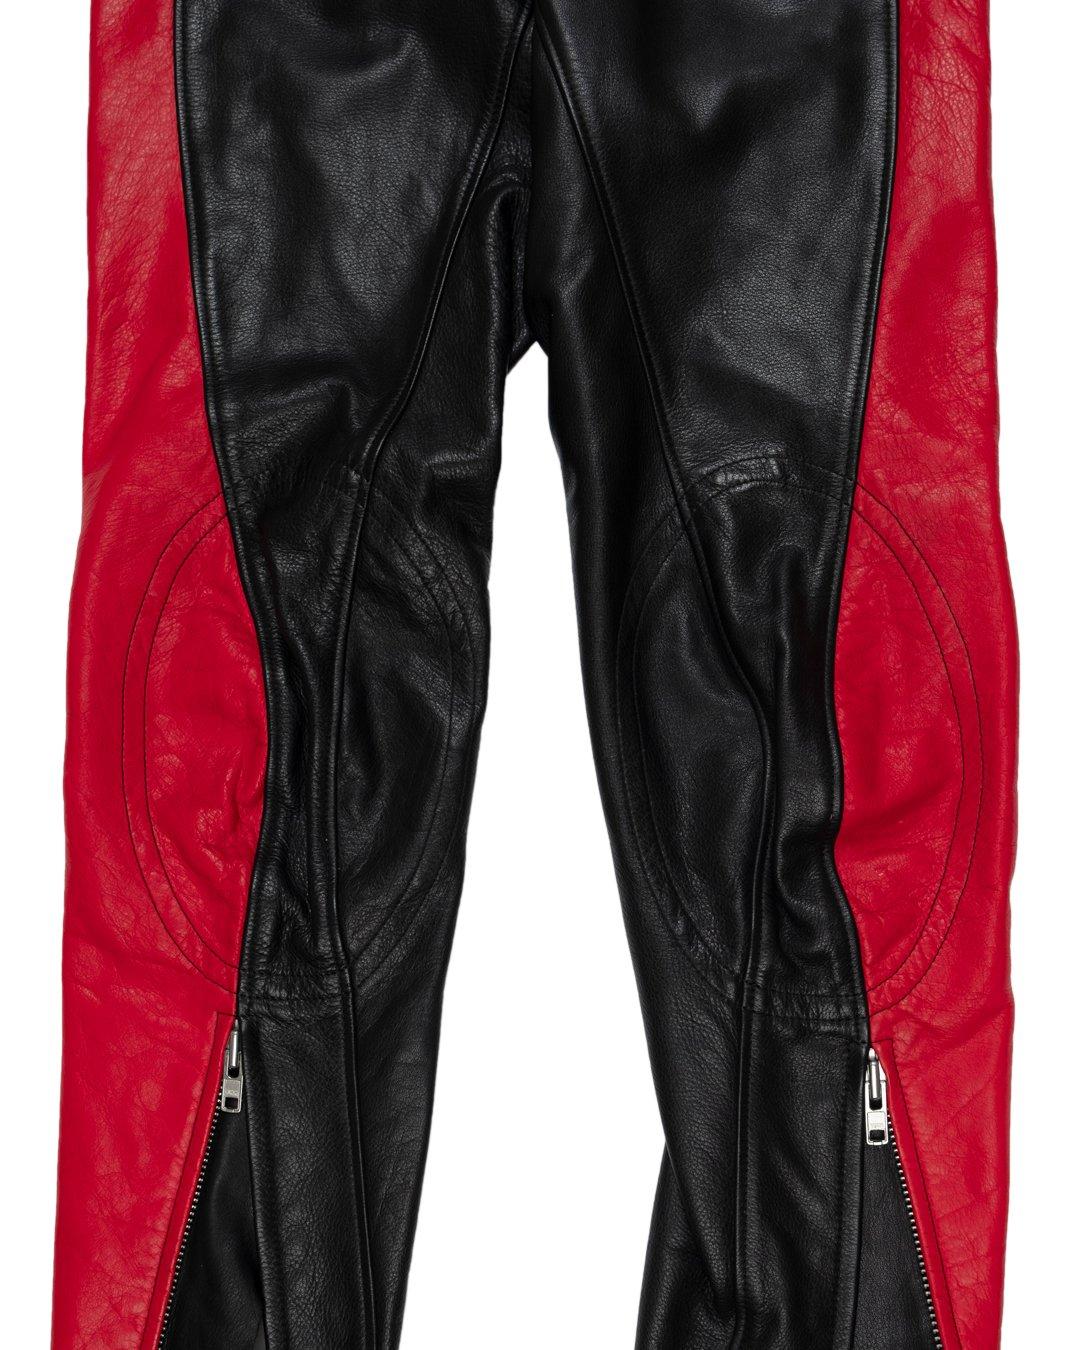 Vetements SS2016 Leather Biker Pants In Excellent Condition For Sale In Beverly Hills, CA